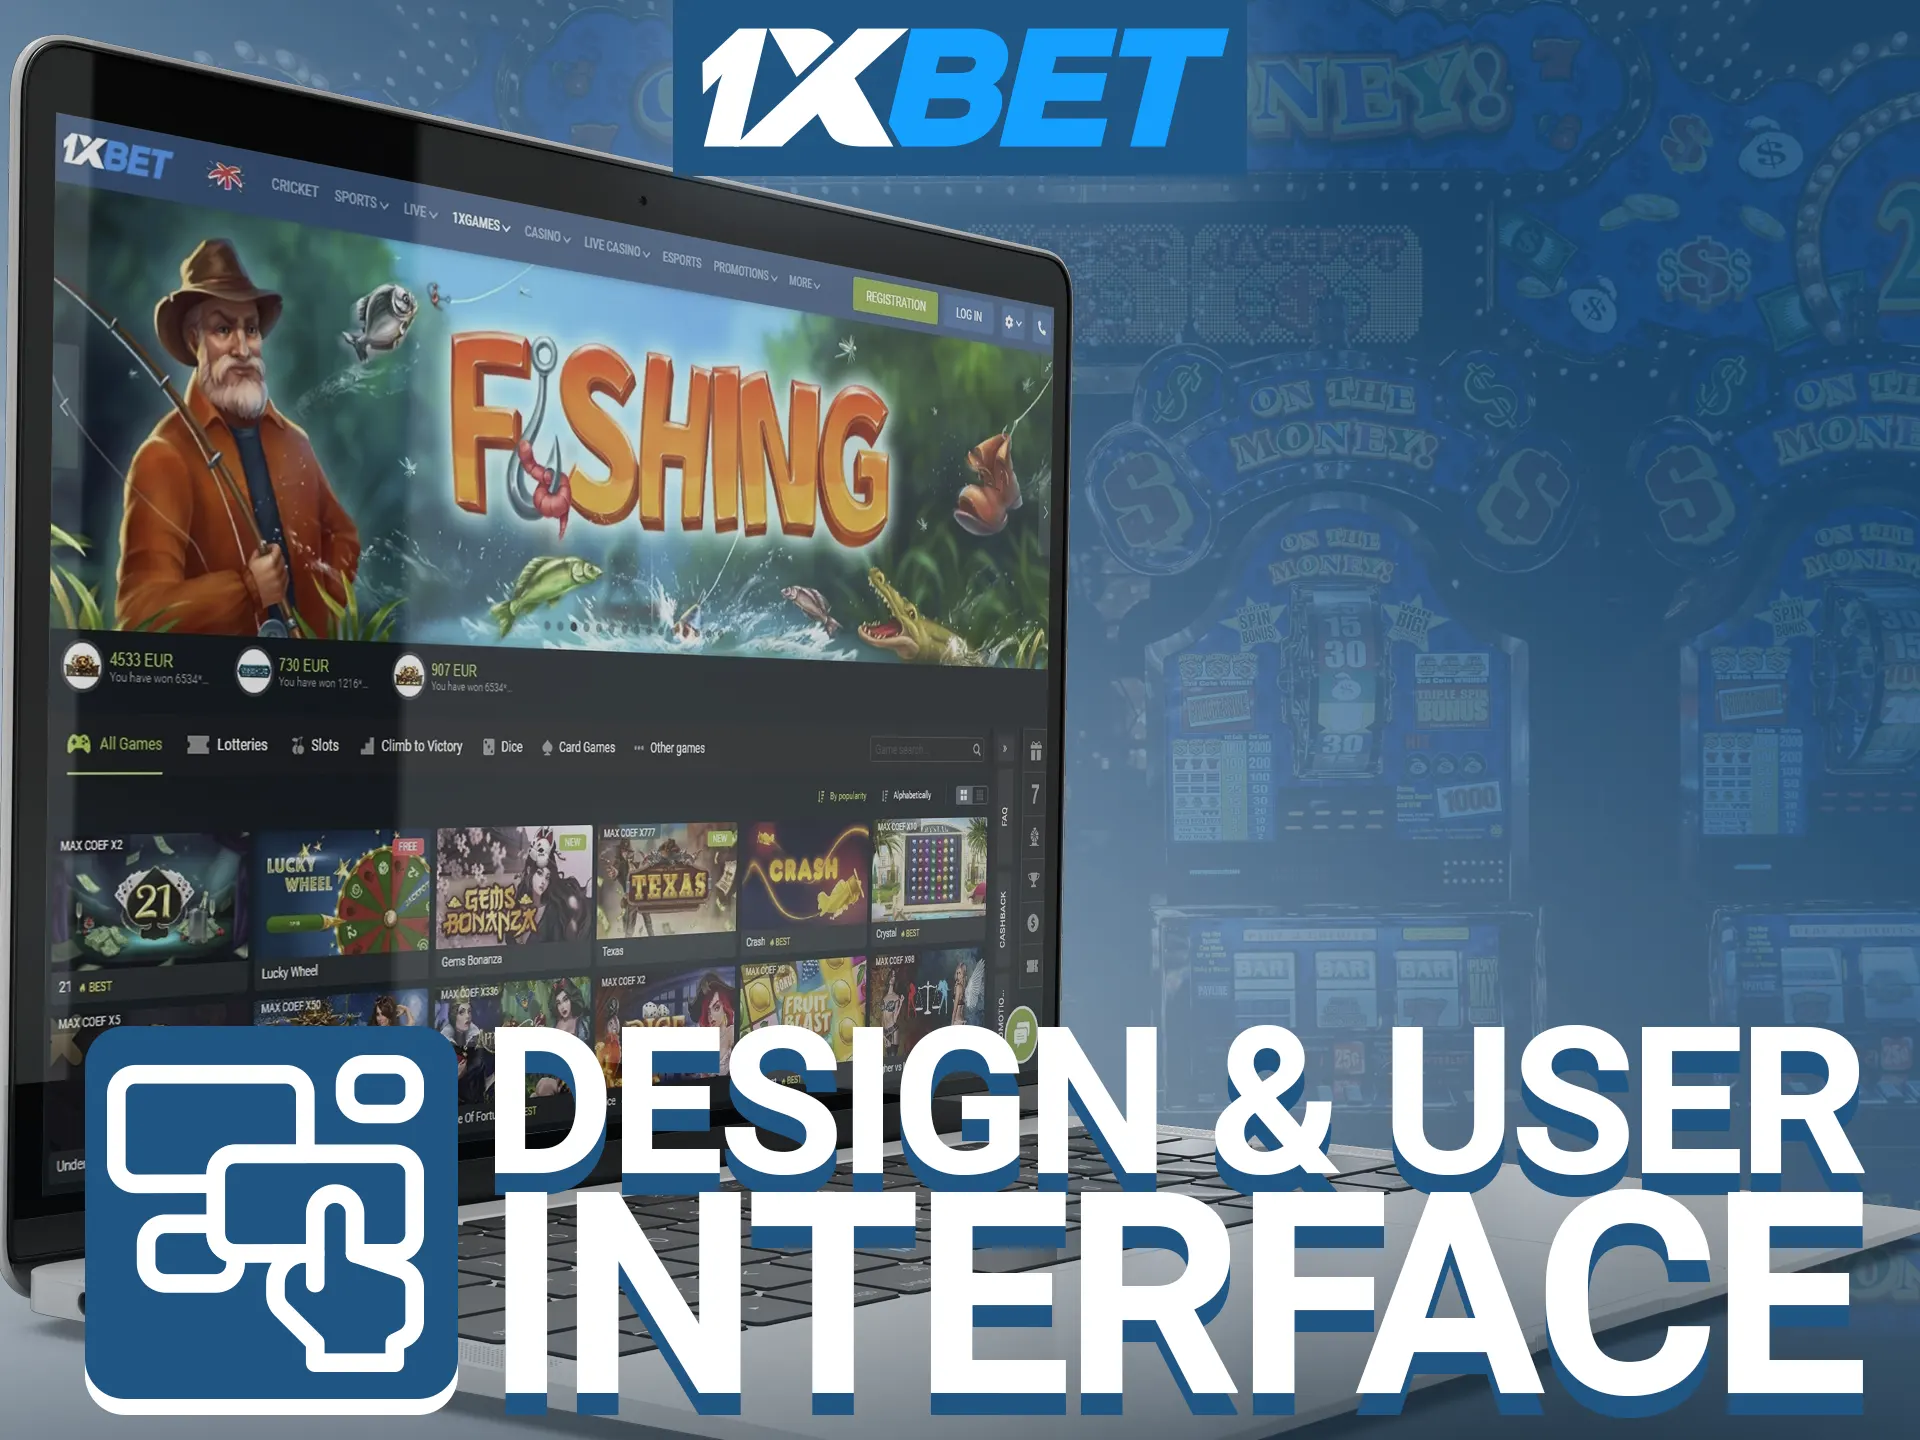 The user interface and the 1xBet casino site are appealing with a modern, elegant design.